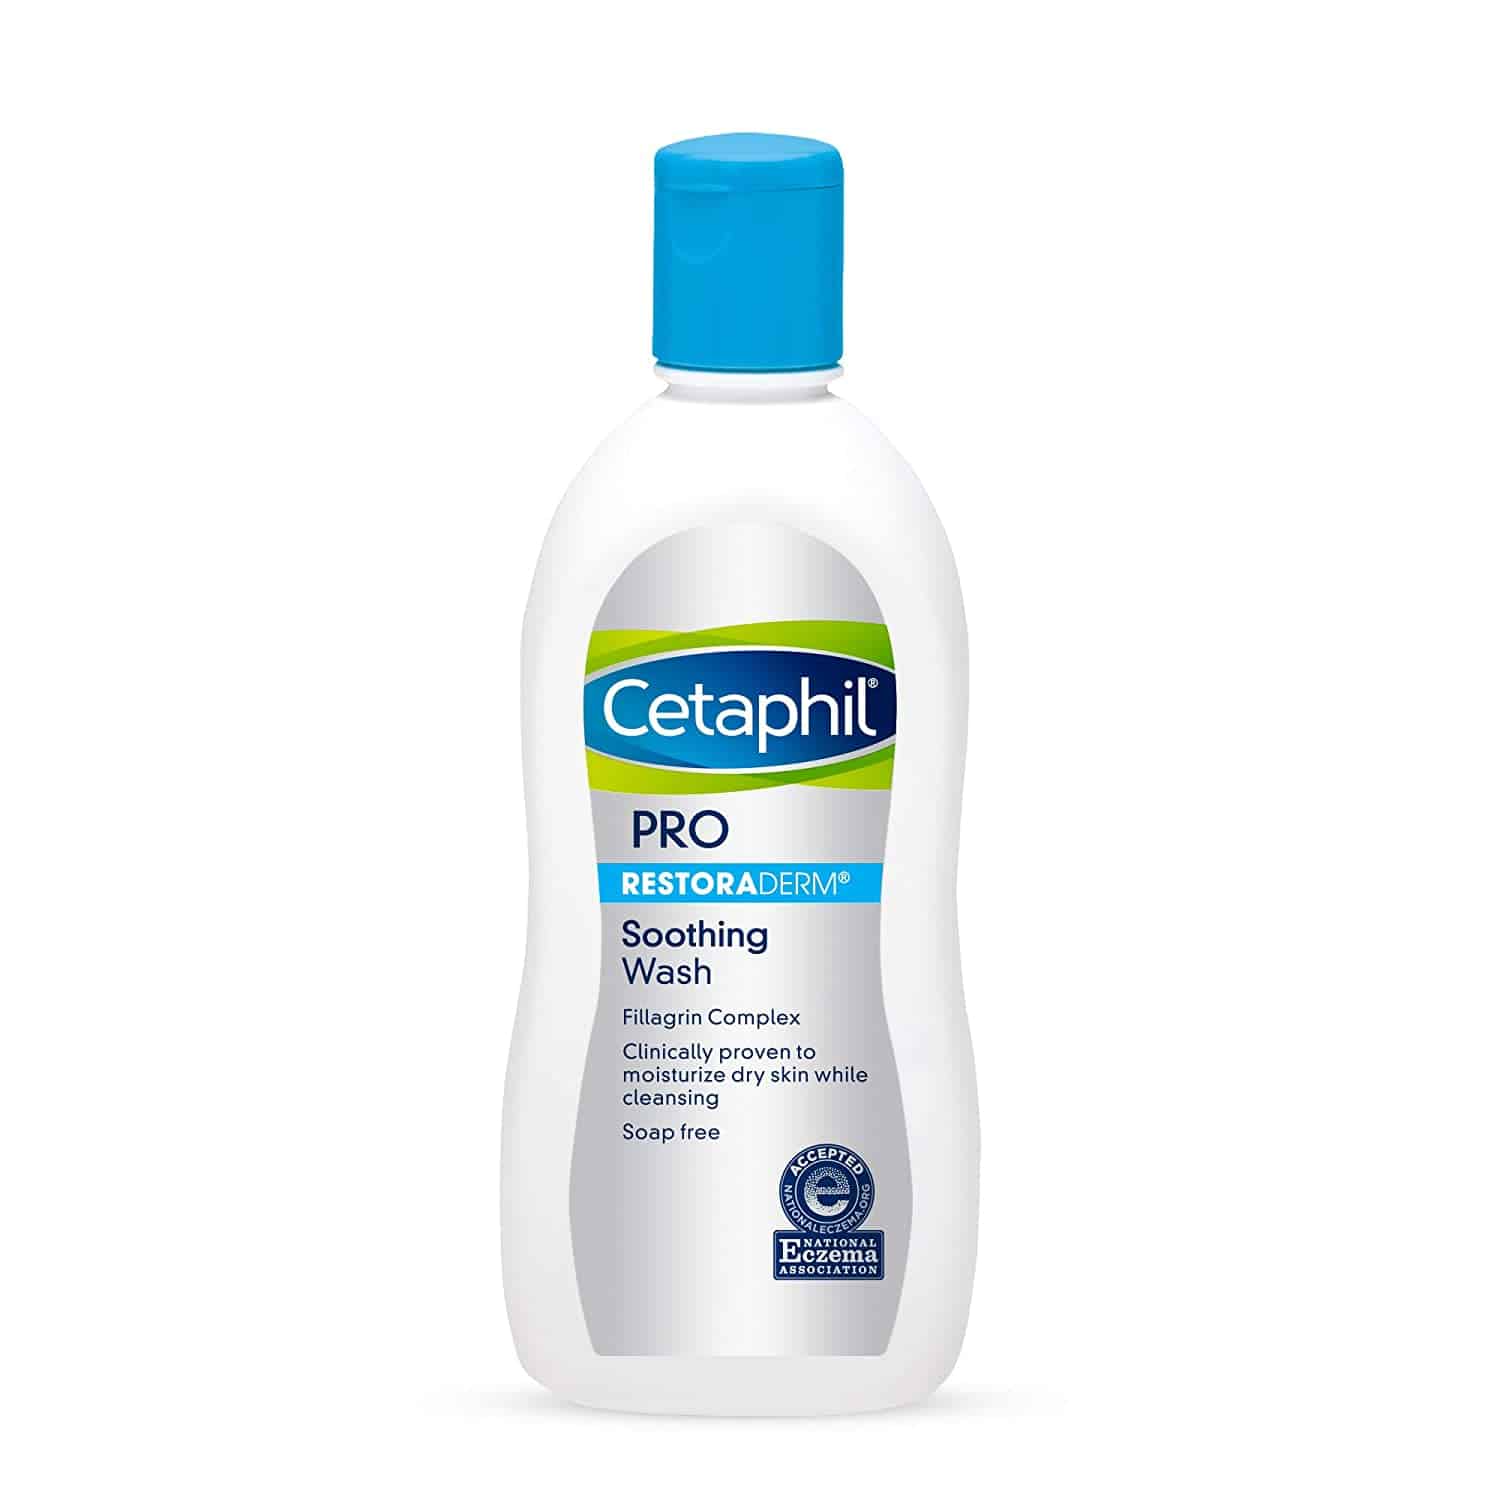 Cetaphil PRO Body Wash for Dry Skin